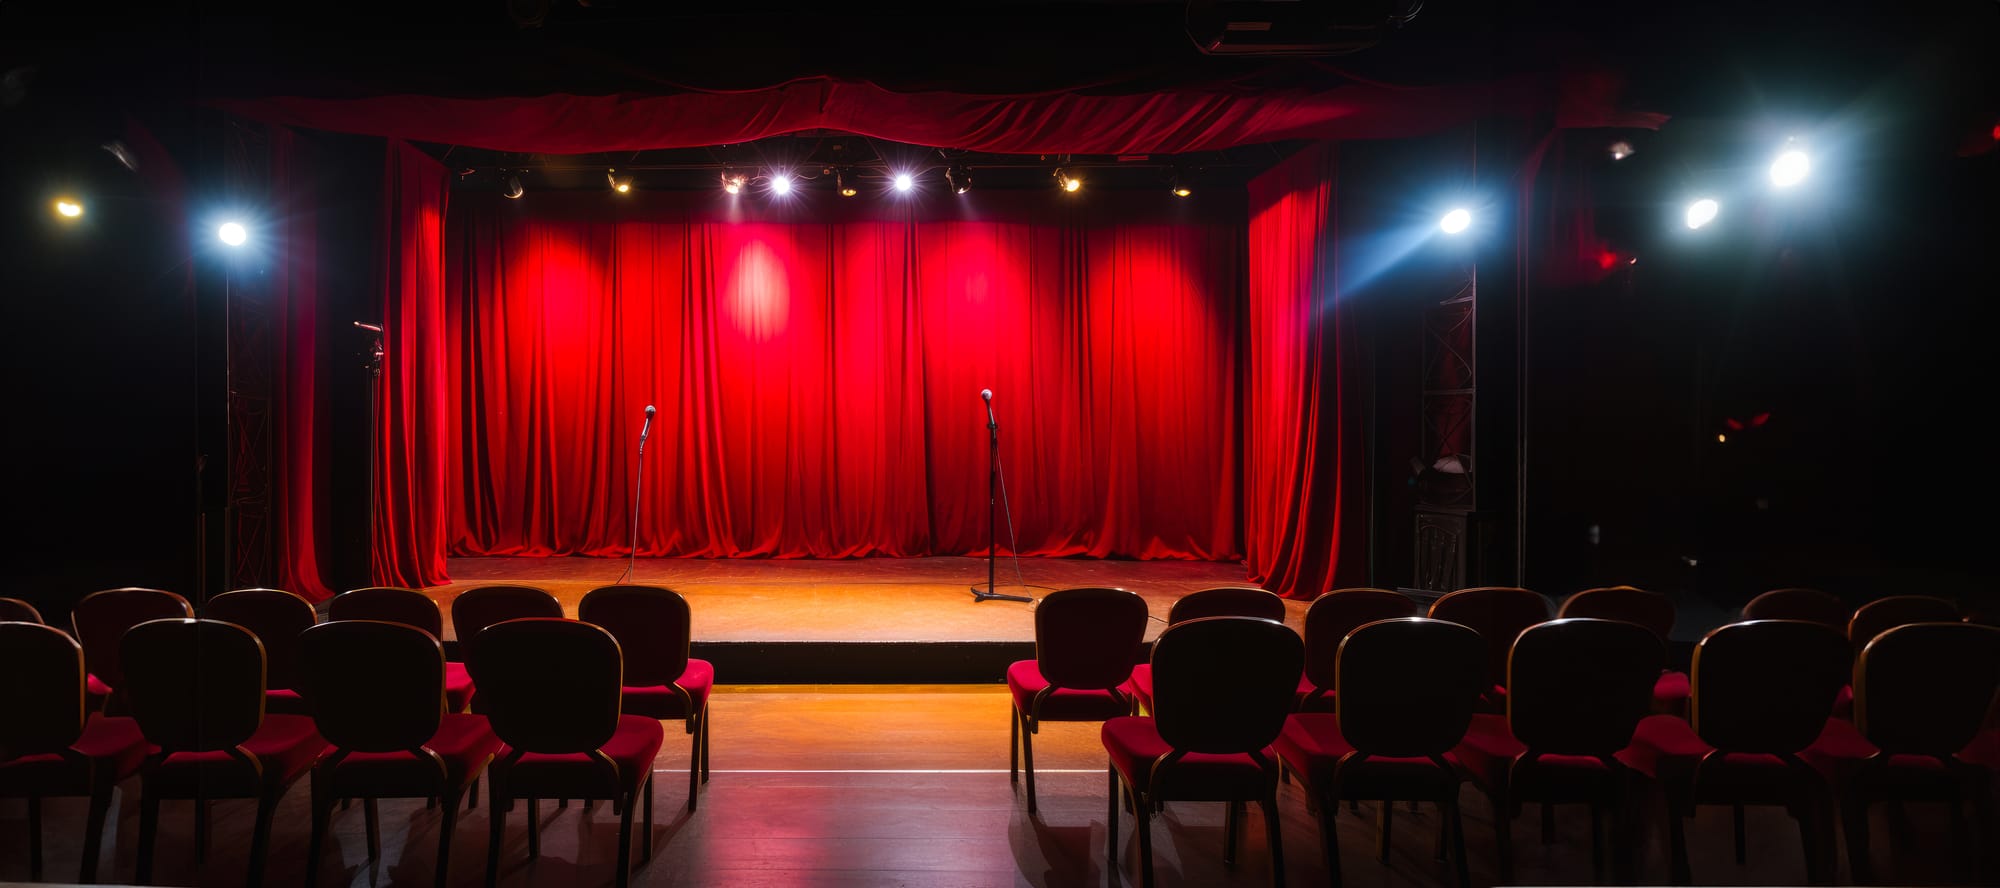 Image of a stage with a red curtain backdrop, two mics, and chairs facing the stage.